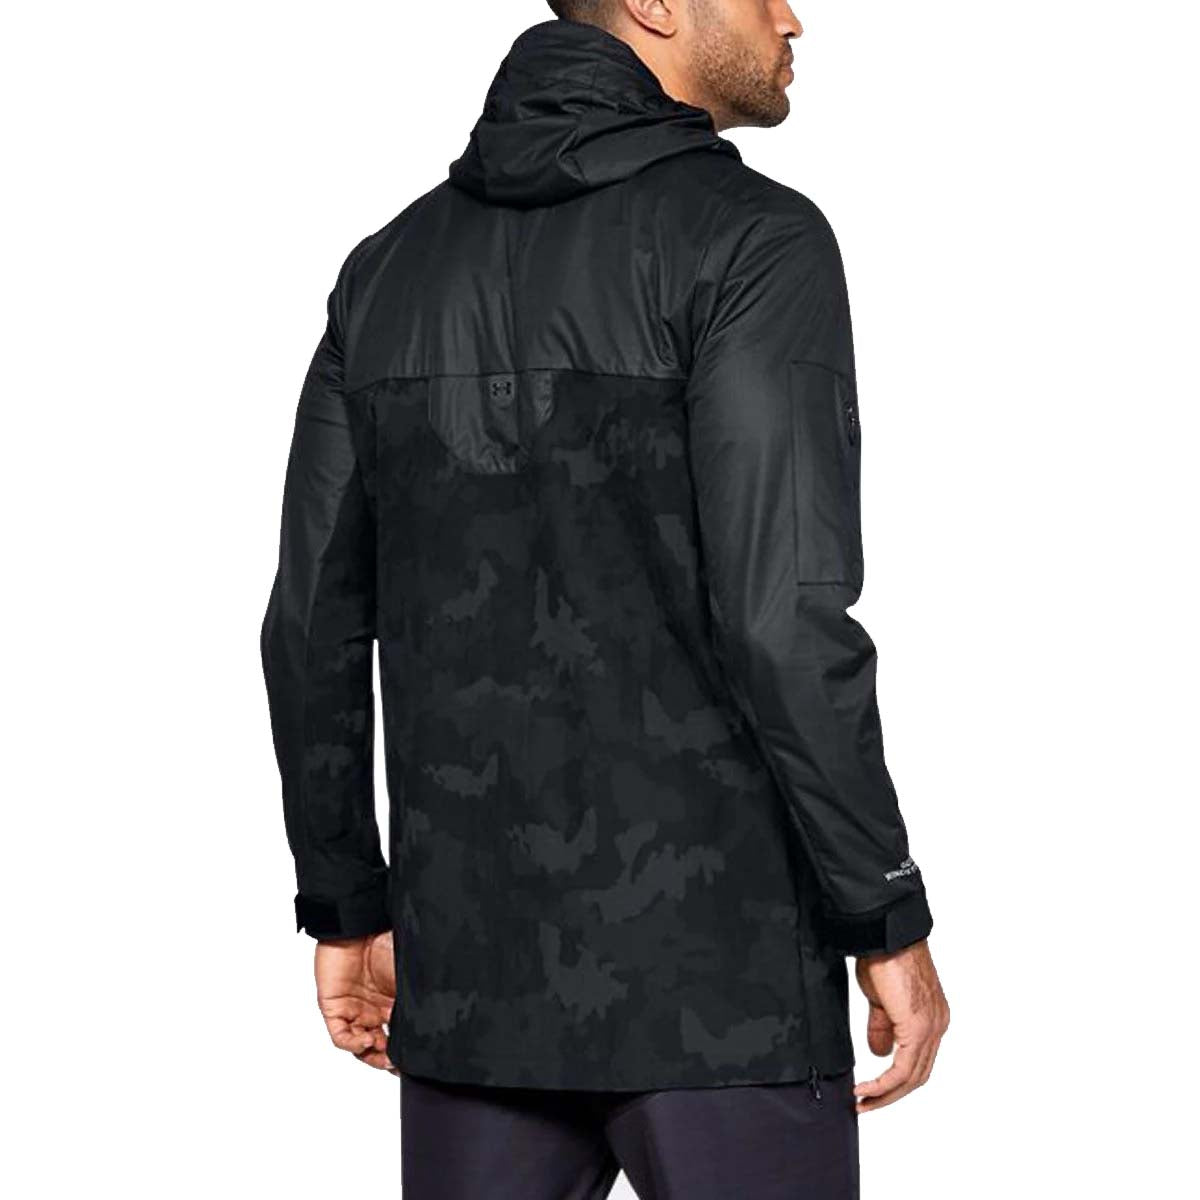 Under Armour Unstoppable GORE Windstopper Mens Jacket